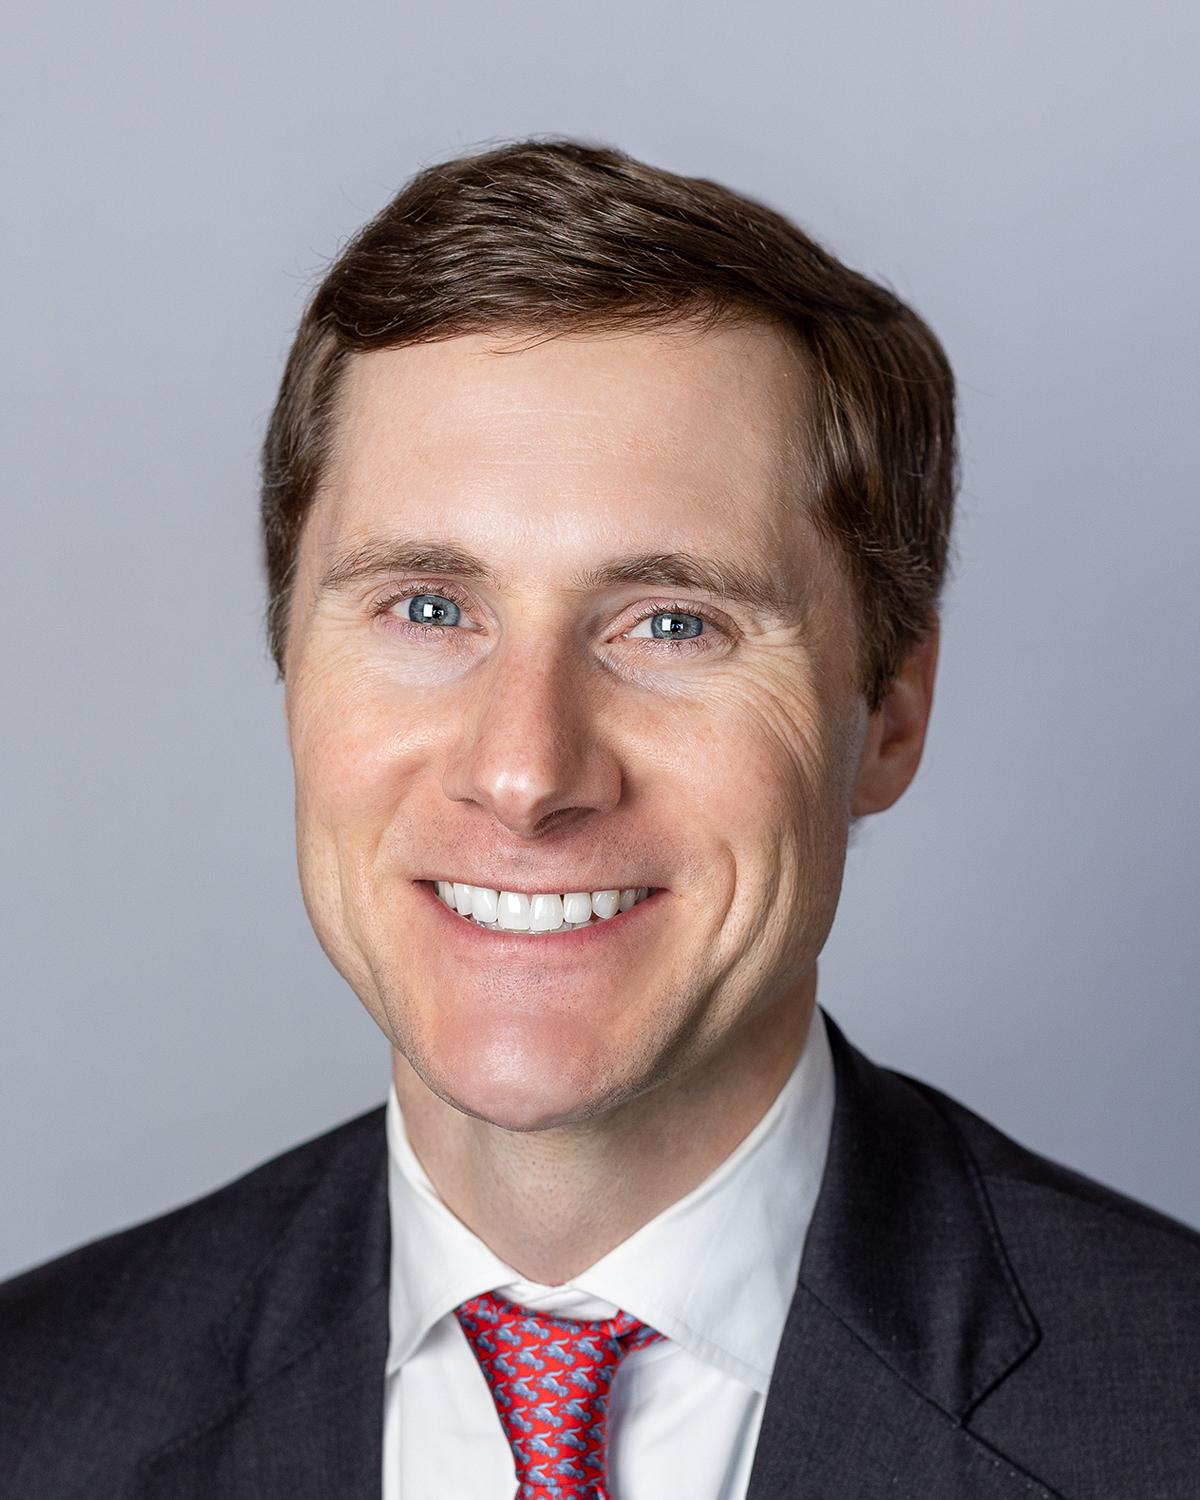 Thomas Hester, Chief Financial Officer